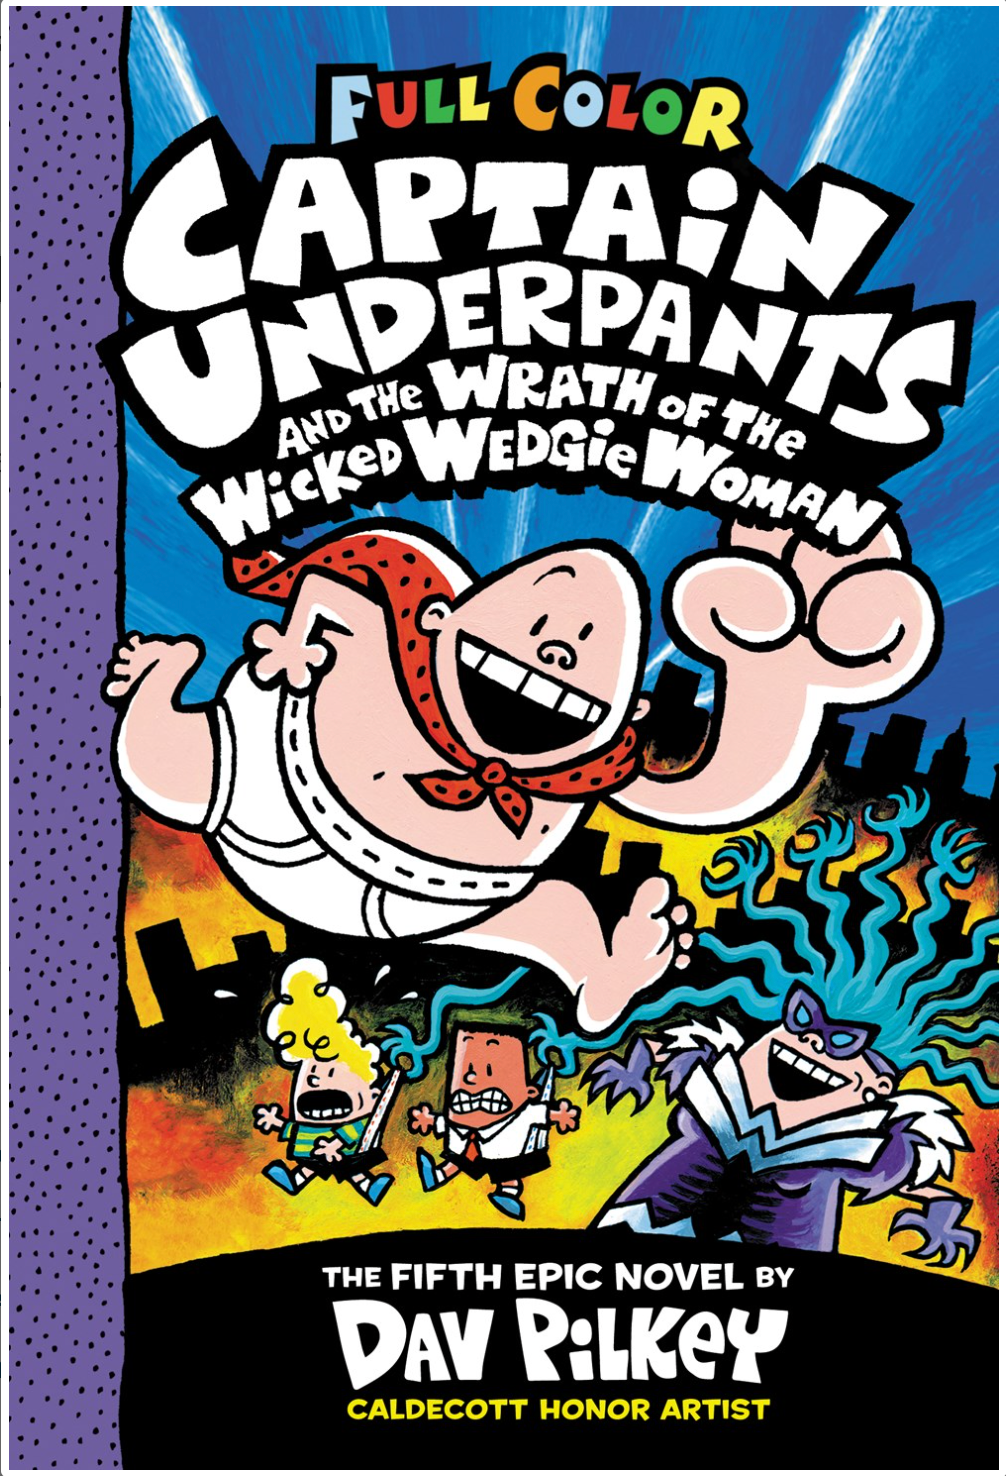 Captain Underpants and the Wrath of the Wicked Wedgie Woman (#5)